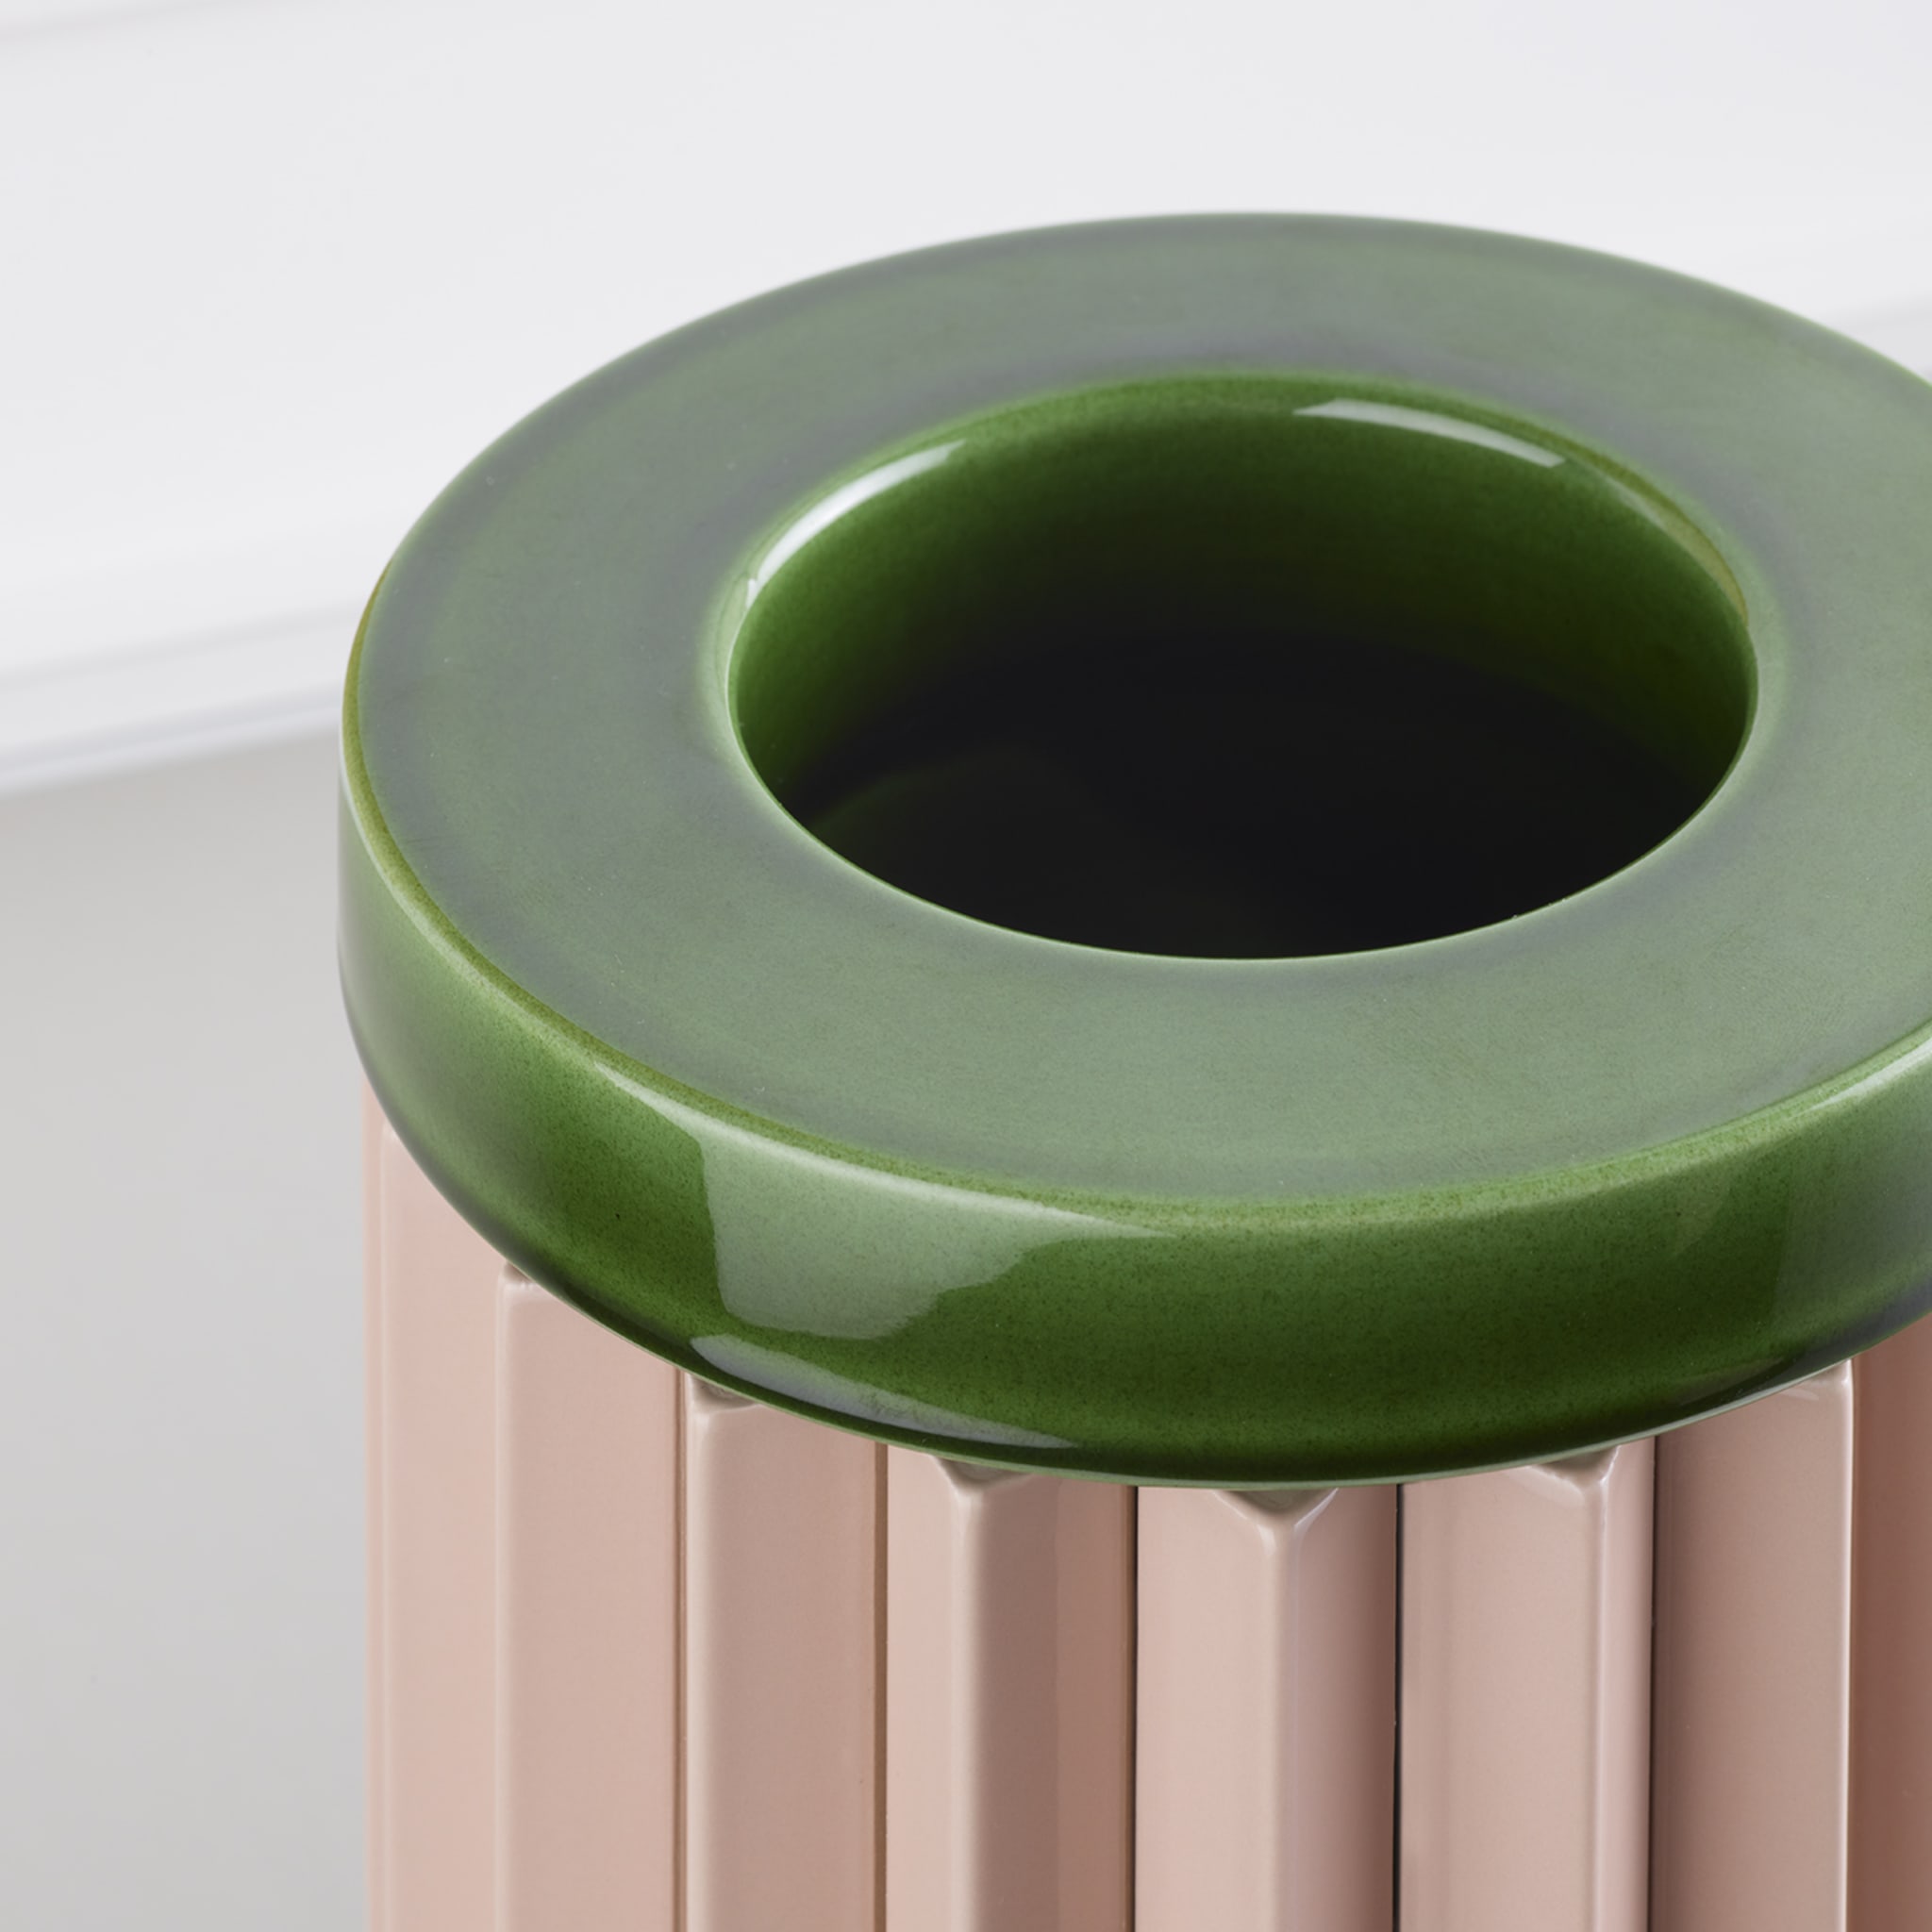 Rombini A Green and Rose Vase by Ronan & Erwan Bouroullec - Alternative view 1